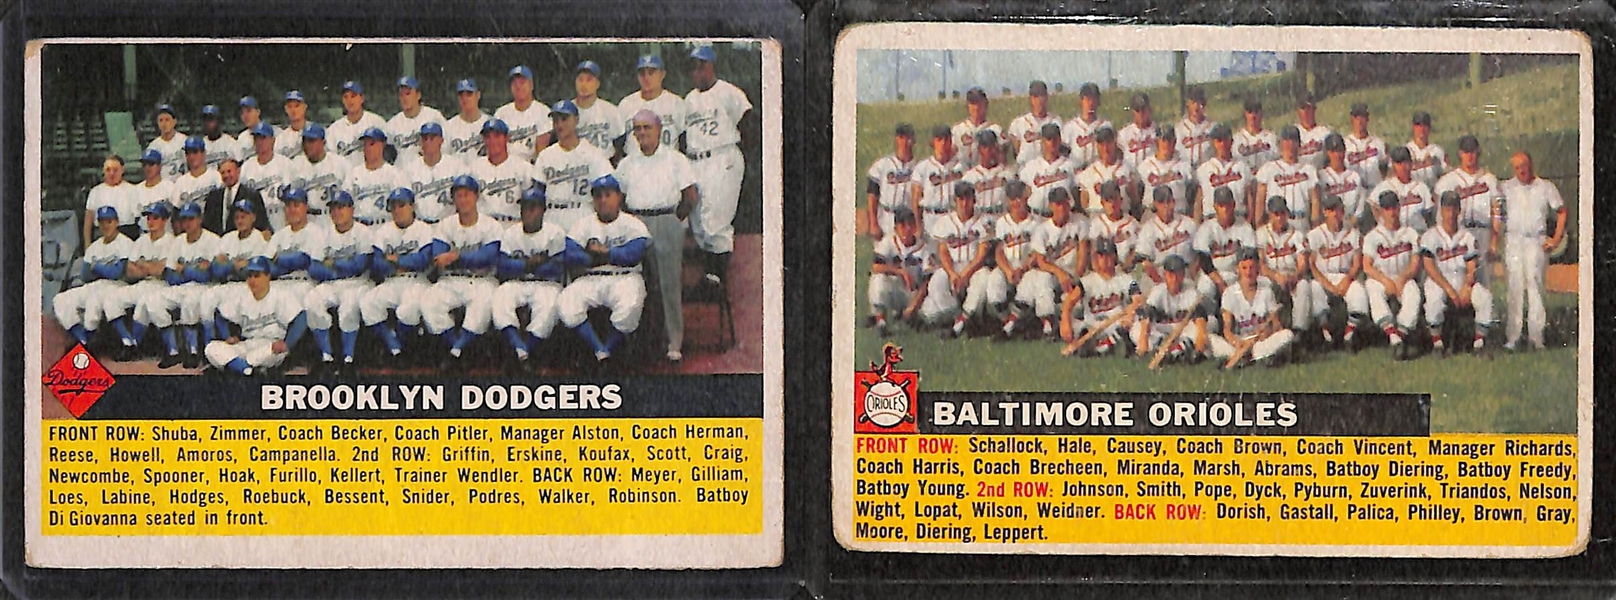 Lot of 8 - 1956 Topps Baseball Cards - 7 Team Cards w. Dodgers & 1st/3rd Checklist Card